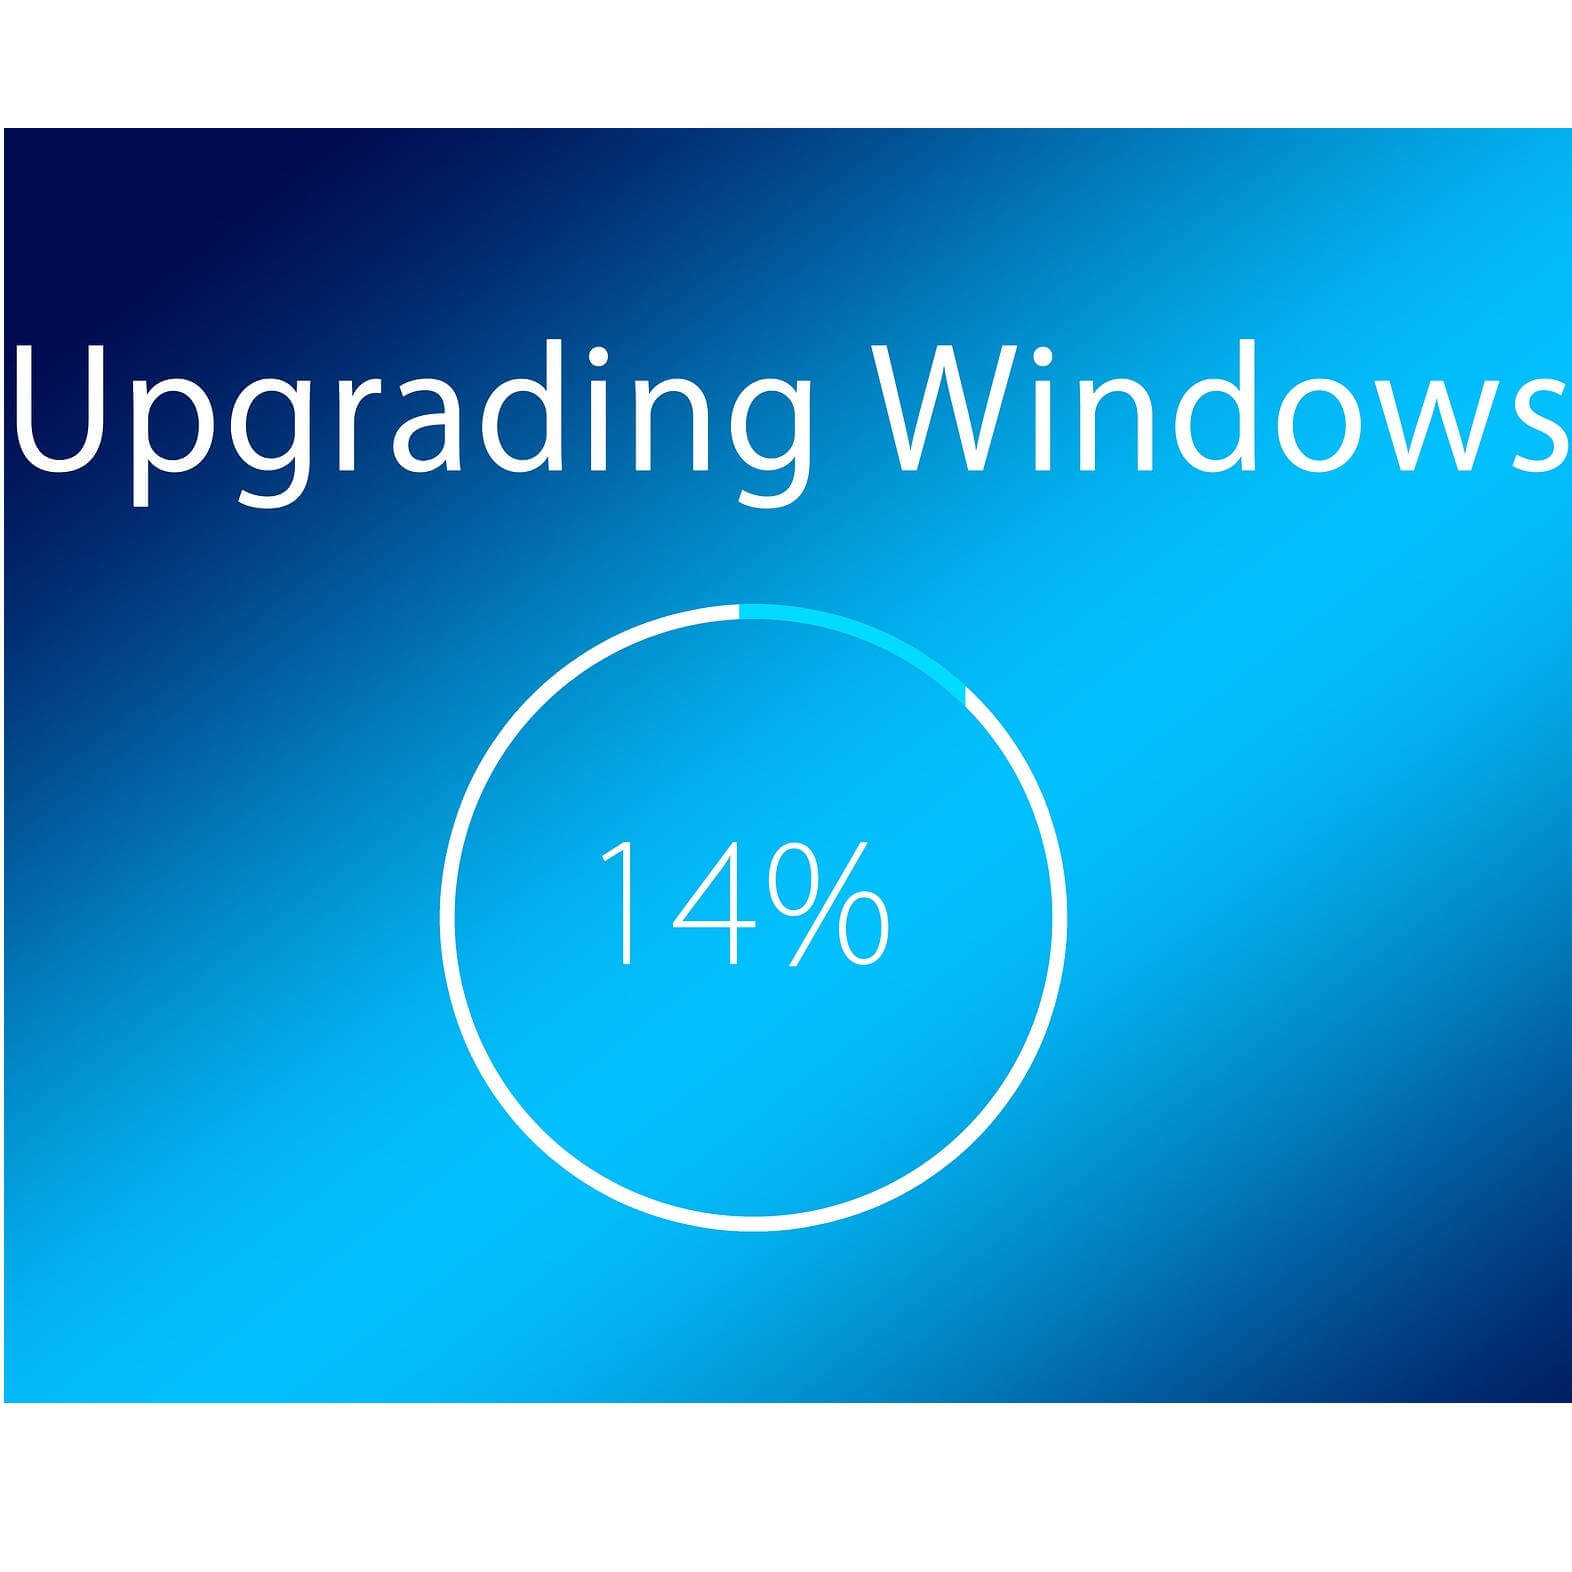 PC can't be upgraded Windows 10 May 2019 update